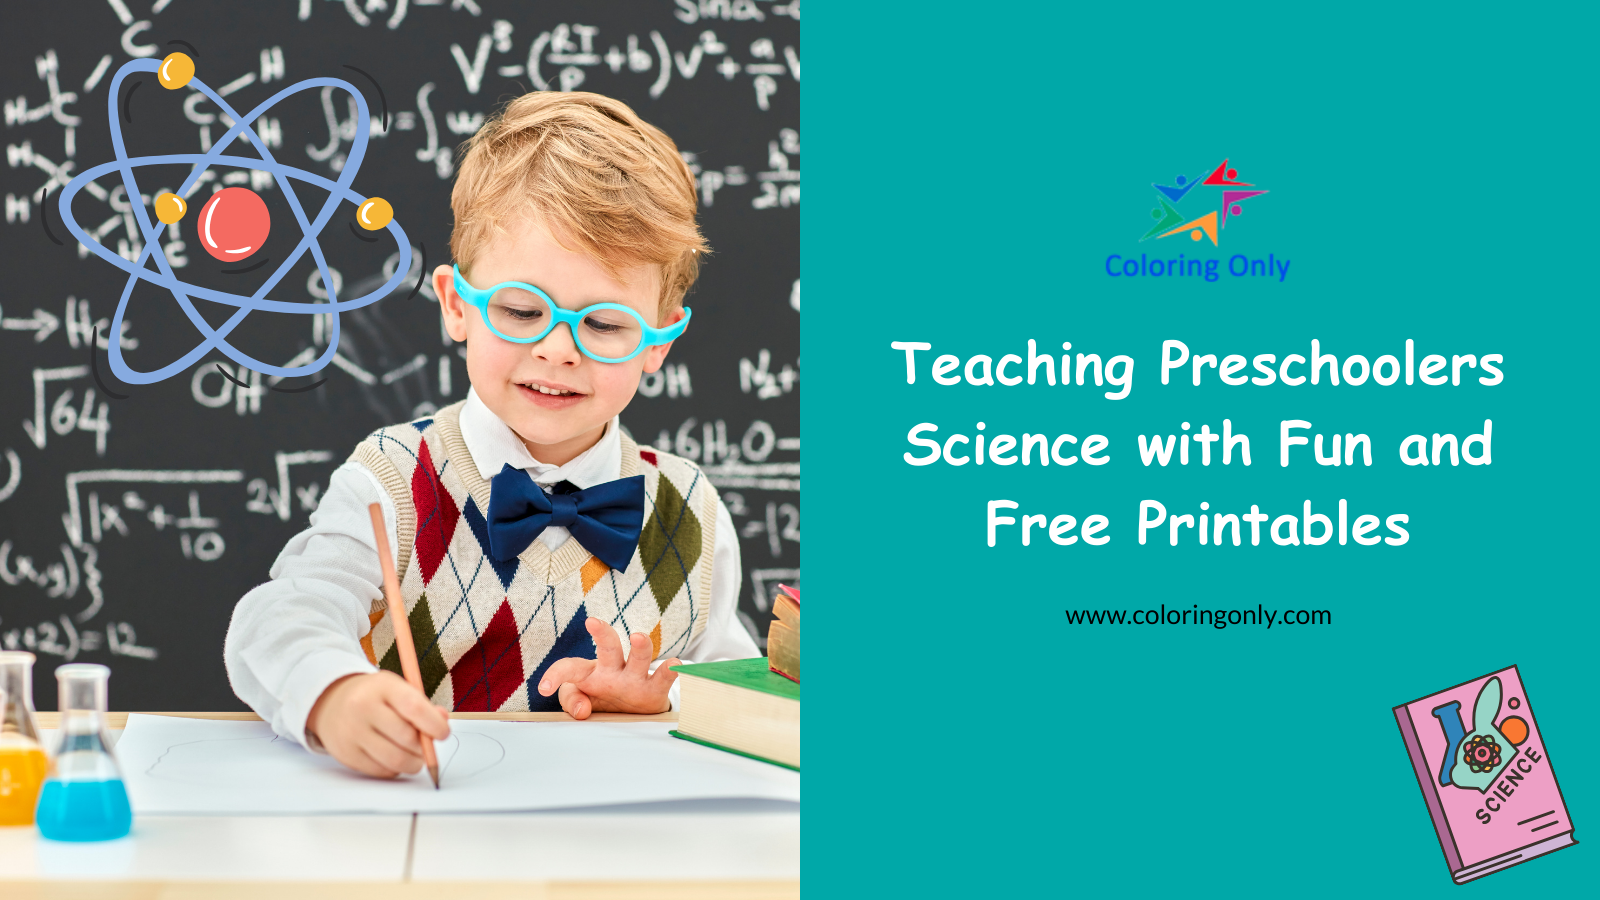 Teaching Preschoolers Science with Fun and Free Printables